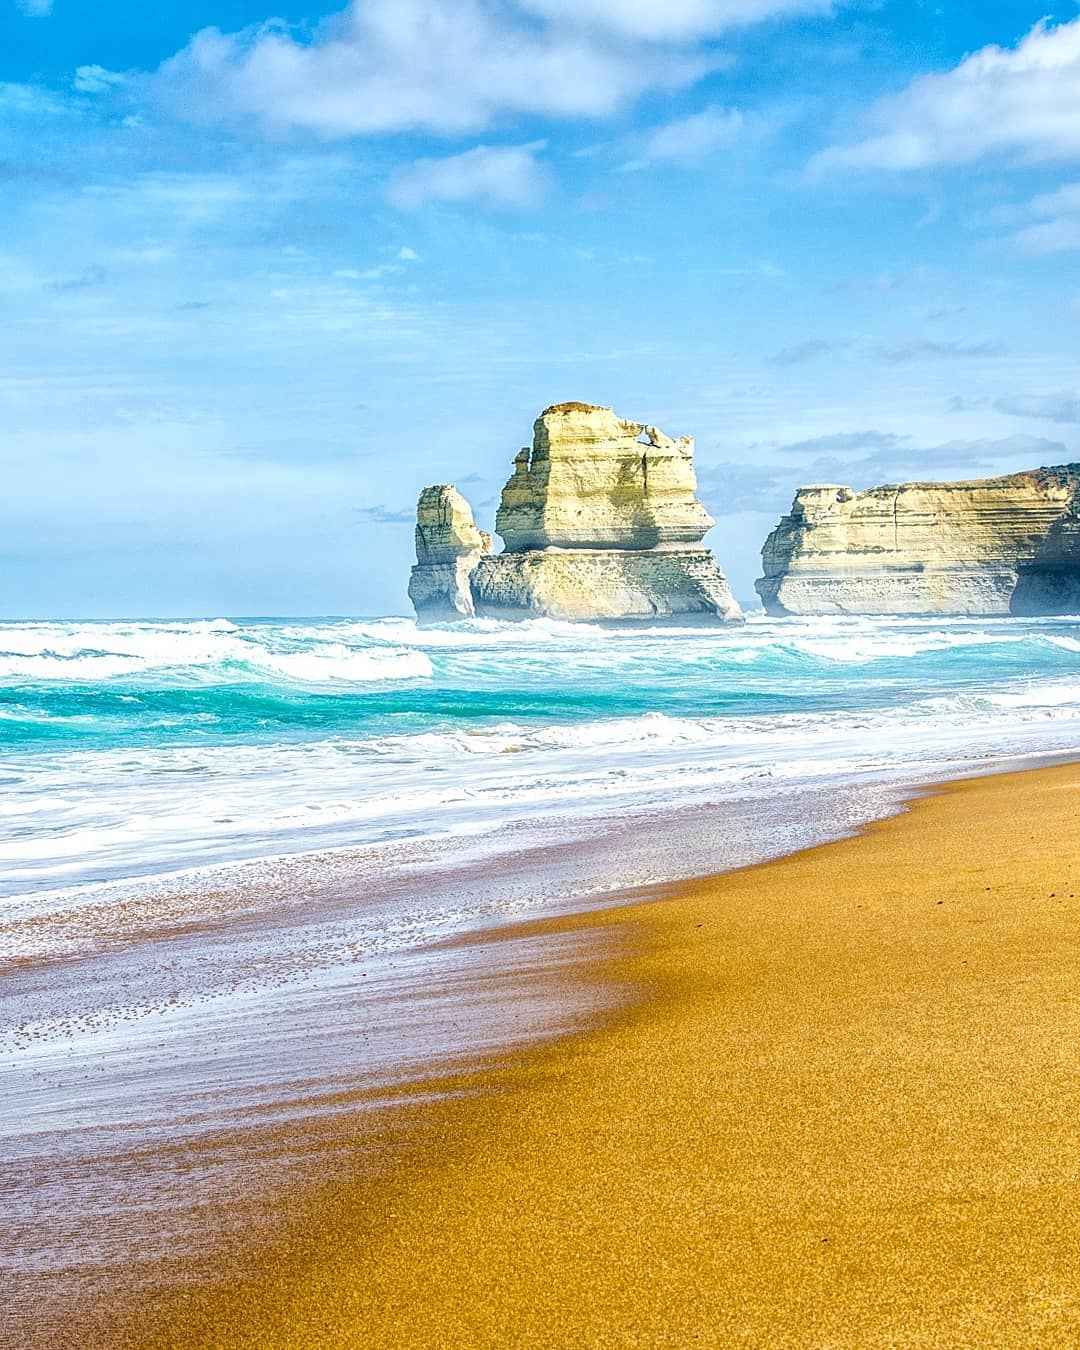 The Gog and Magog offshore stacks viewed from the beach at Gibson Steps on the Great Ocean Road in Victoria, Australia. ⠀
⠀
Although not considered part of the nearby 12 Apostles, the sheer scale of natural sculpting evident at the Gog and Magog is every bit as impressive.⠀
⠀
Gog and Magog are the local names given to the two stacks that can be viewed from the viewing platform and beach at the bottom of the steps – as long as the Southern Ocean permits it that is!⠀
⠀
We were driving the @greatoceanroad in #Victoria with @hertzaustralia.⠀
-⠀⠀
-⠀⠀
-⠀⠀
-⠀⠀
-⠀⠀
-⠀⠀
-⠀⠀
#gibsonsteps #gibsonstepsbeach #gor #seegor #twelveapostles #12apostles #greatoceanroadtrip #portcampbell #shipwreckcoast #greatoceanroad #VictoriaAustralia #seevictoria #visitvictoria #theoutbound #PortCampbellNationalPark #ocean #oz #roadtrip #roadtripaustralia #roadtripping #driveaustralia #wonderful_places #oceanlovers #apostles #seeaustralia #lppathfinders #ausgeo